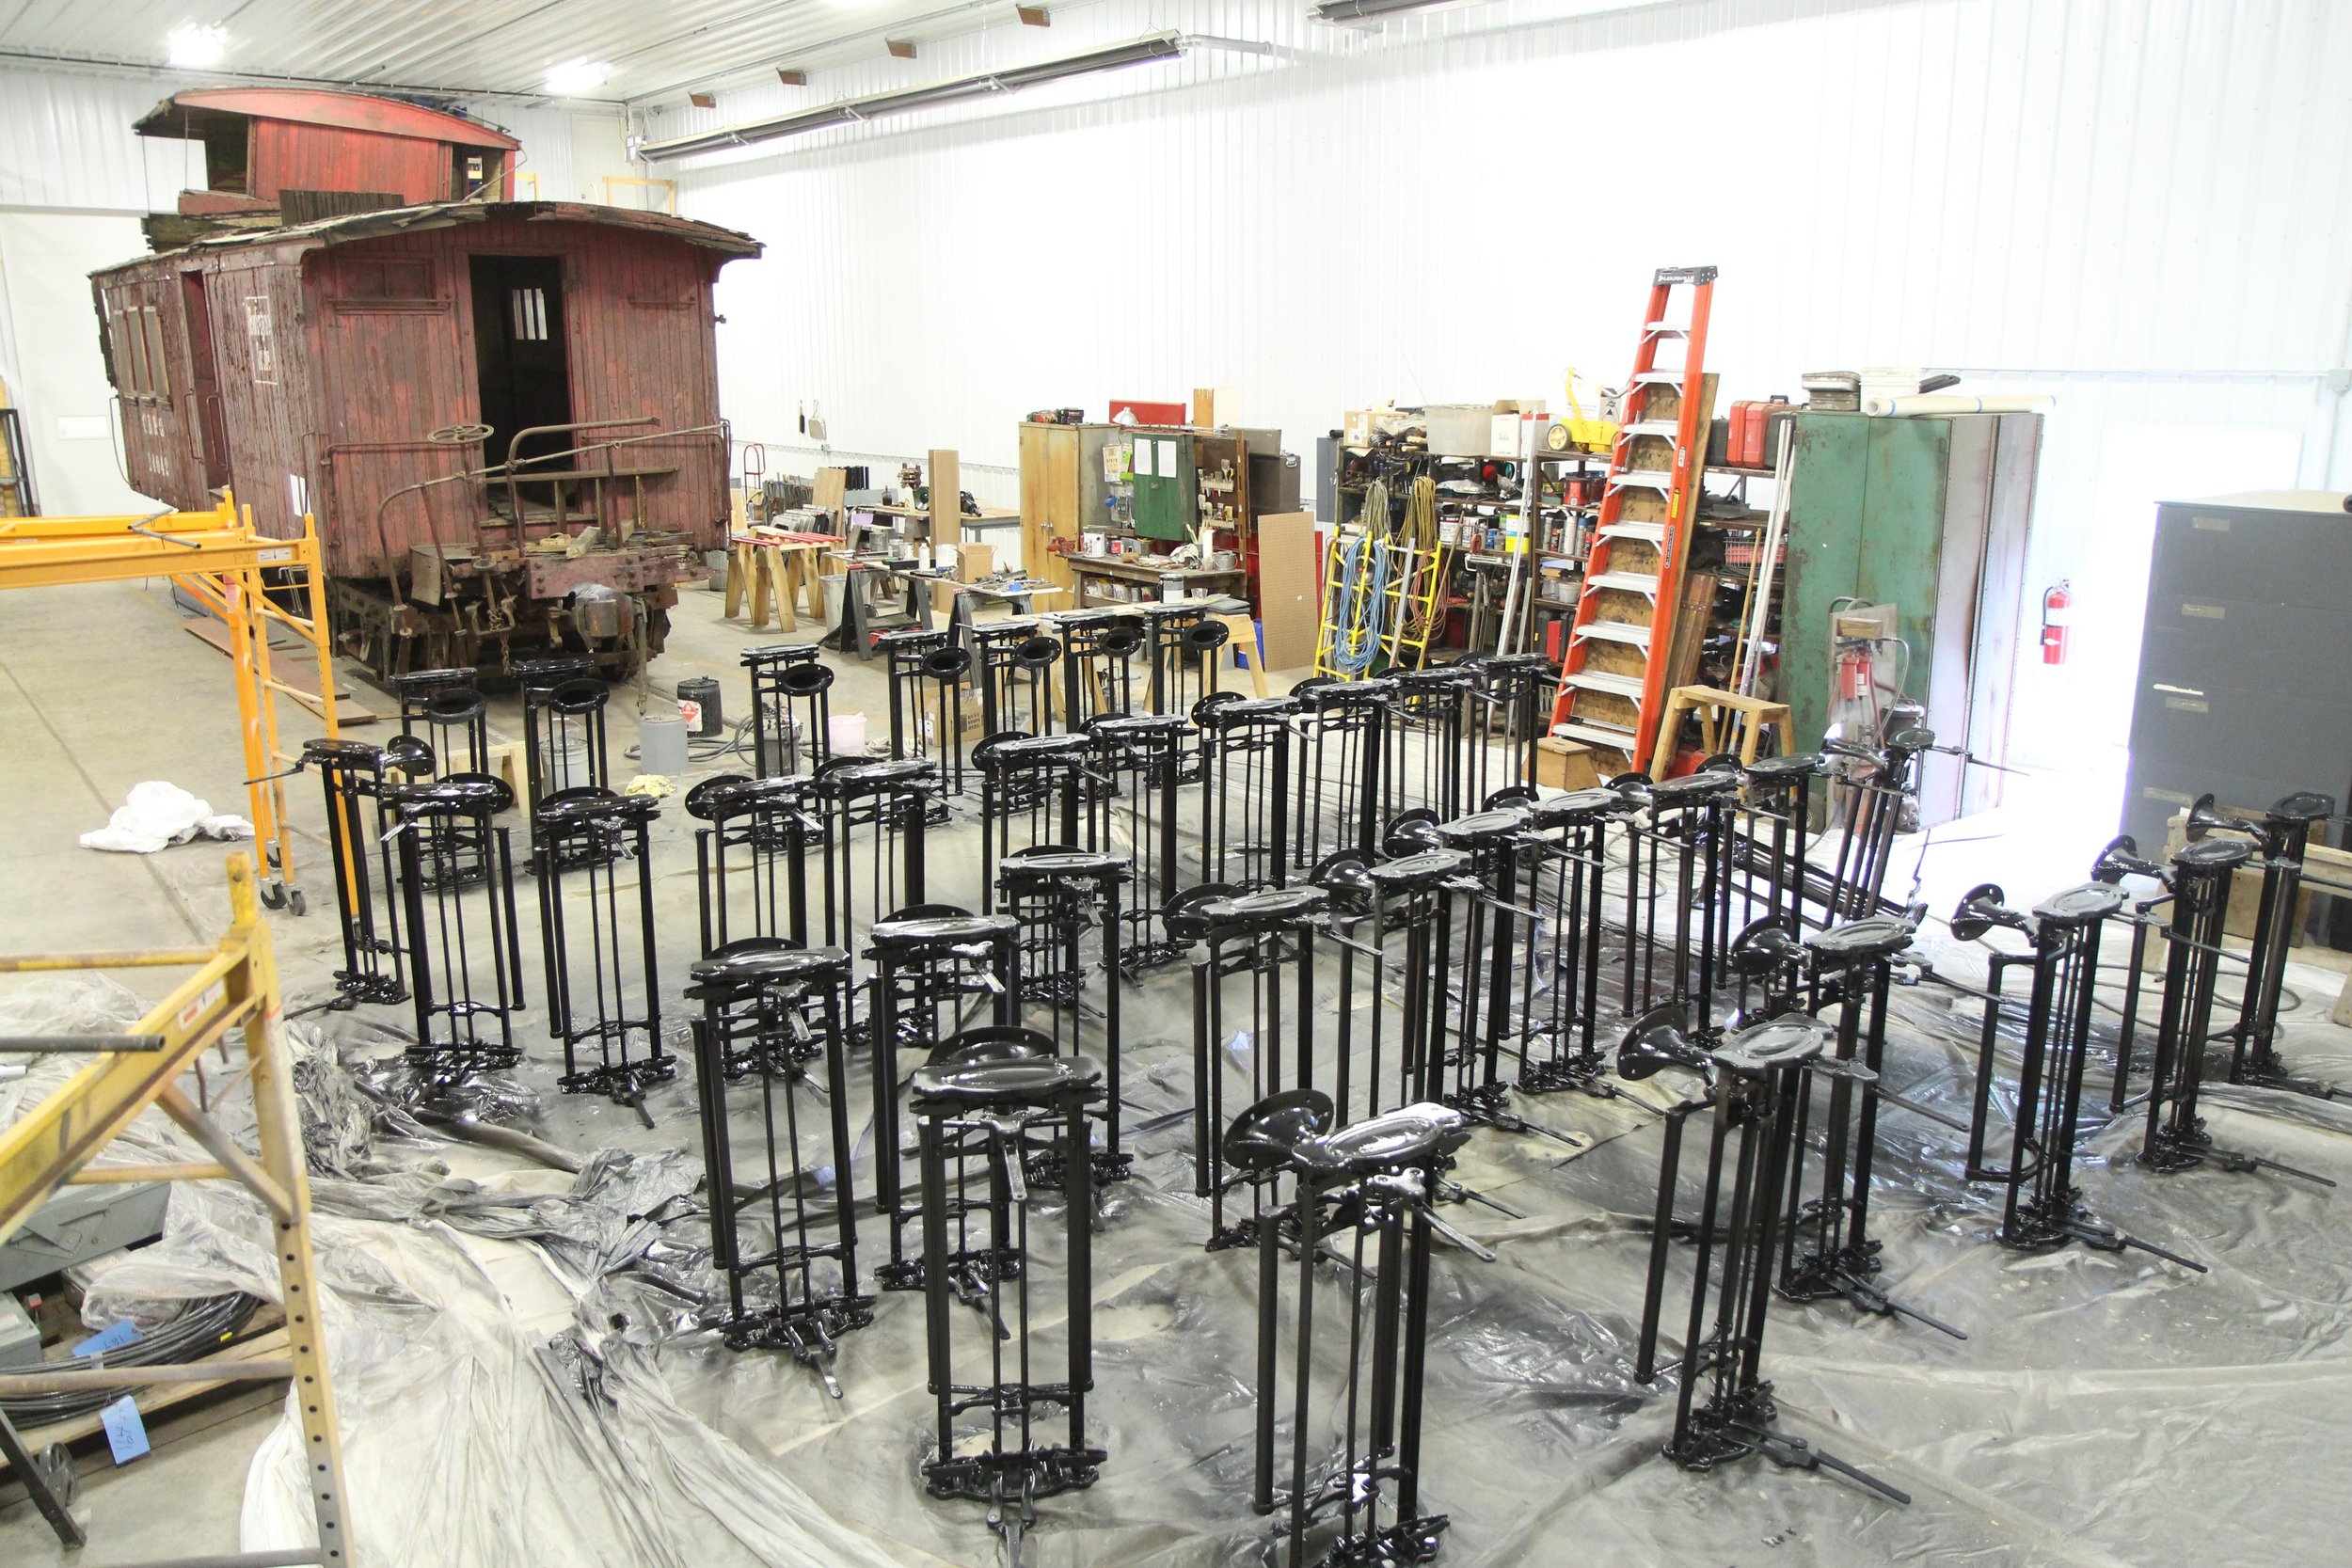  After sandblasting, the seat frames were painted. Here they are laid out in the car shop before reassembly begins.  